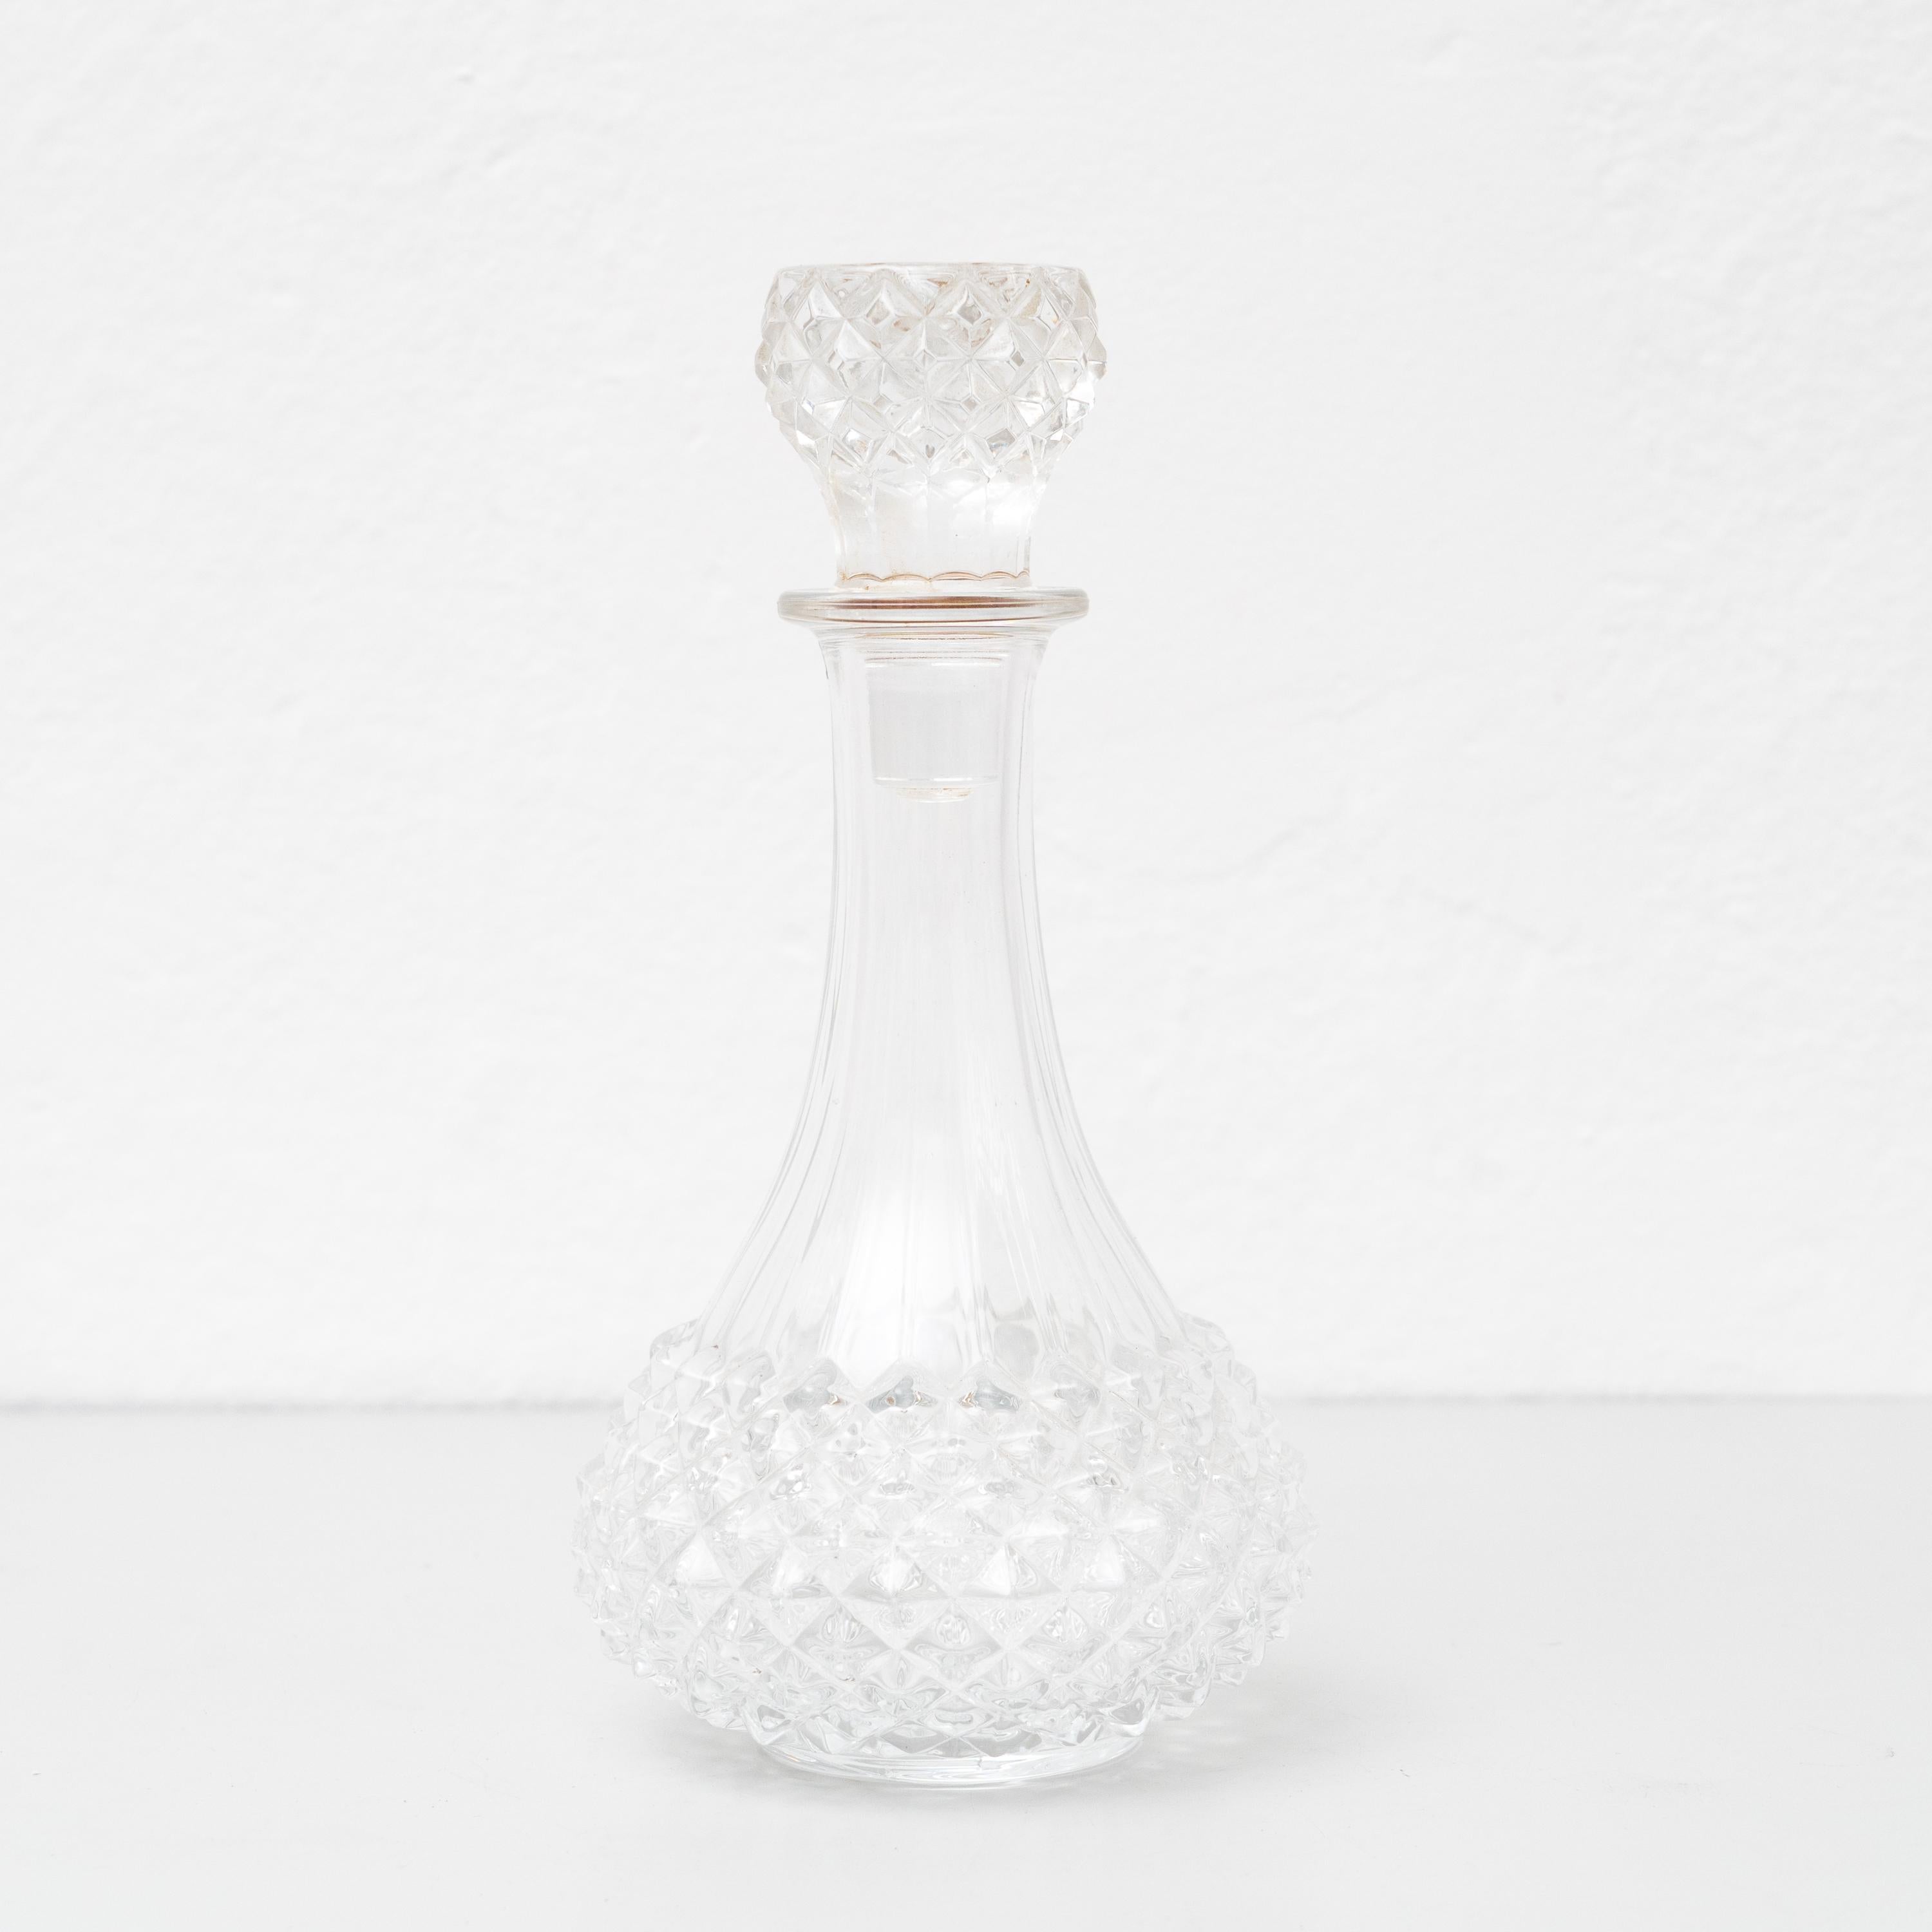  Vintage Glass Vase with Diamond Capped Style, Circa 1930  For Sale 7